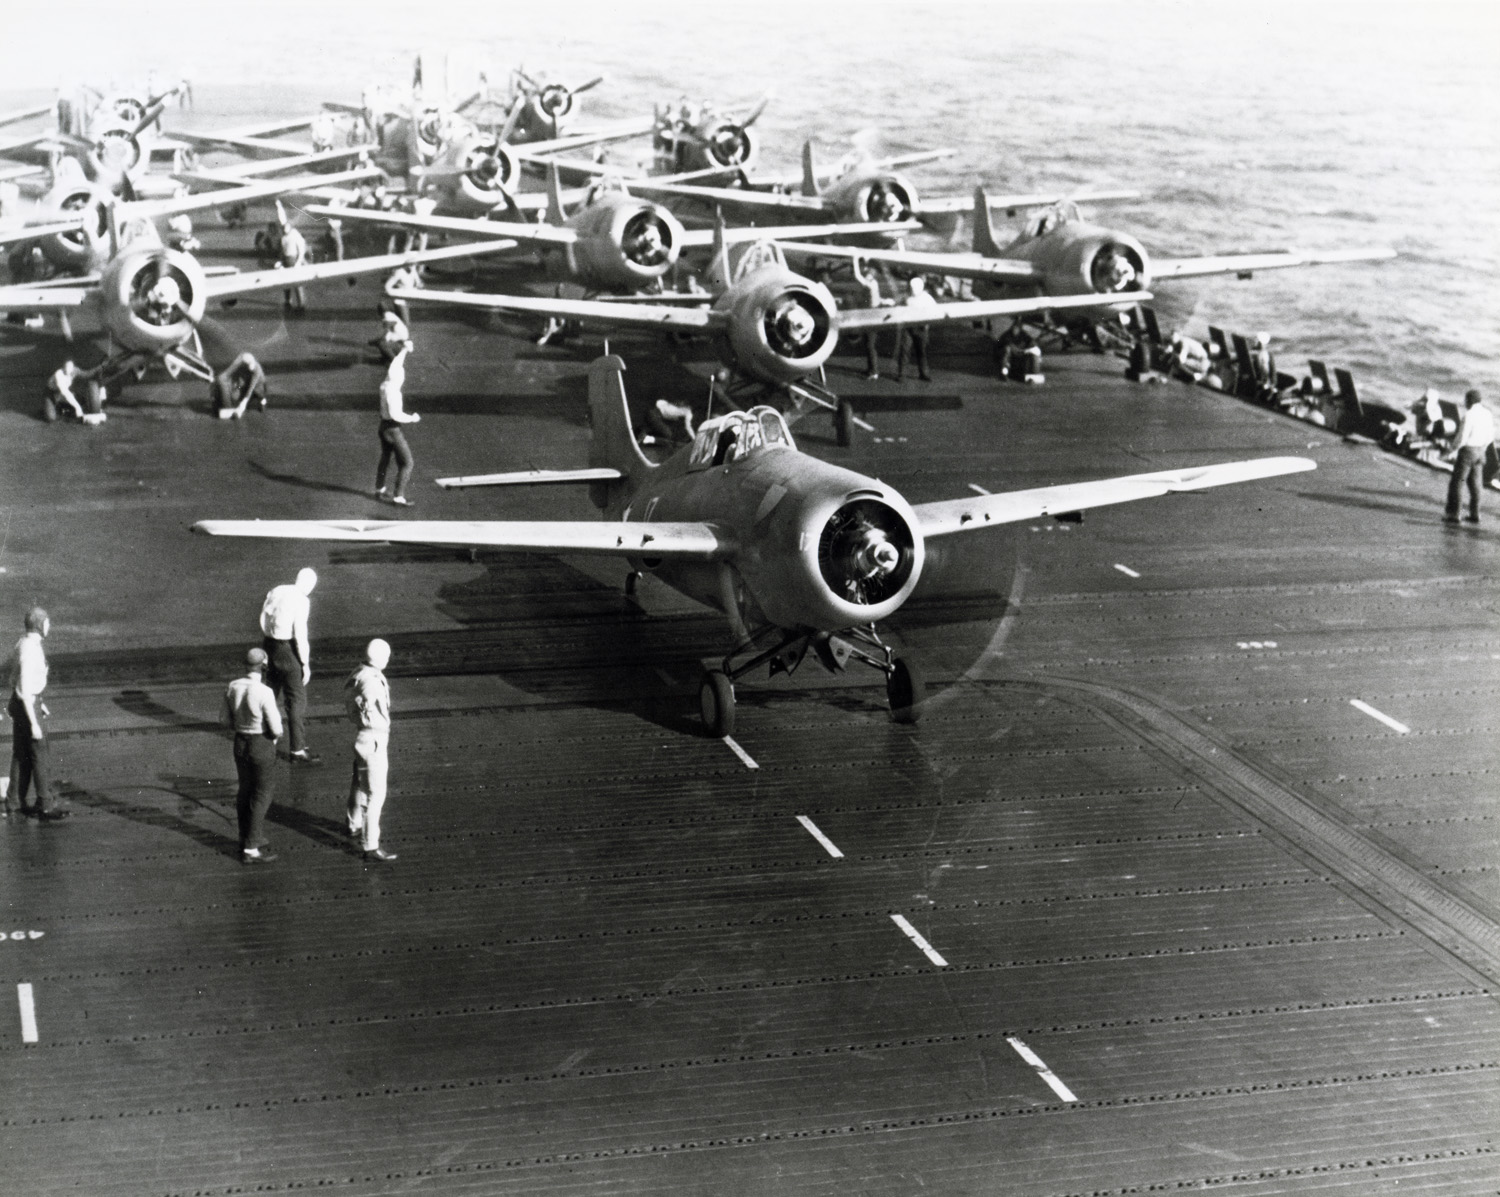 F4F-3 Wildcats of Fighting Squadron 6 get ready for launch from USS Enterprise, May 12 1942 while on their way toward the Battle of the Coral Sea (which was over before Enterprise could get there).